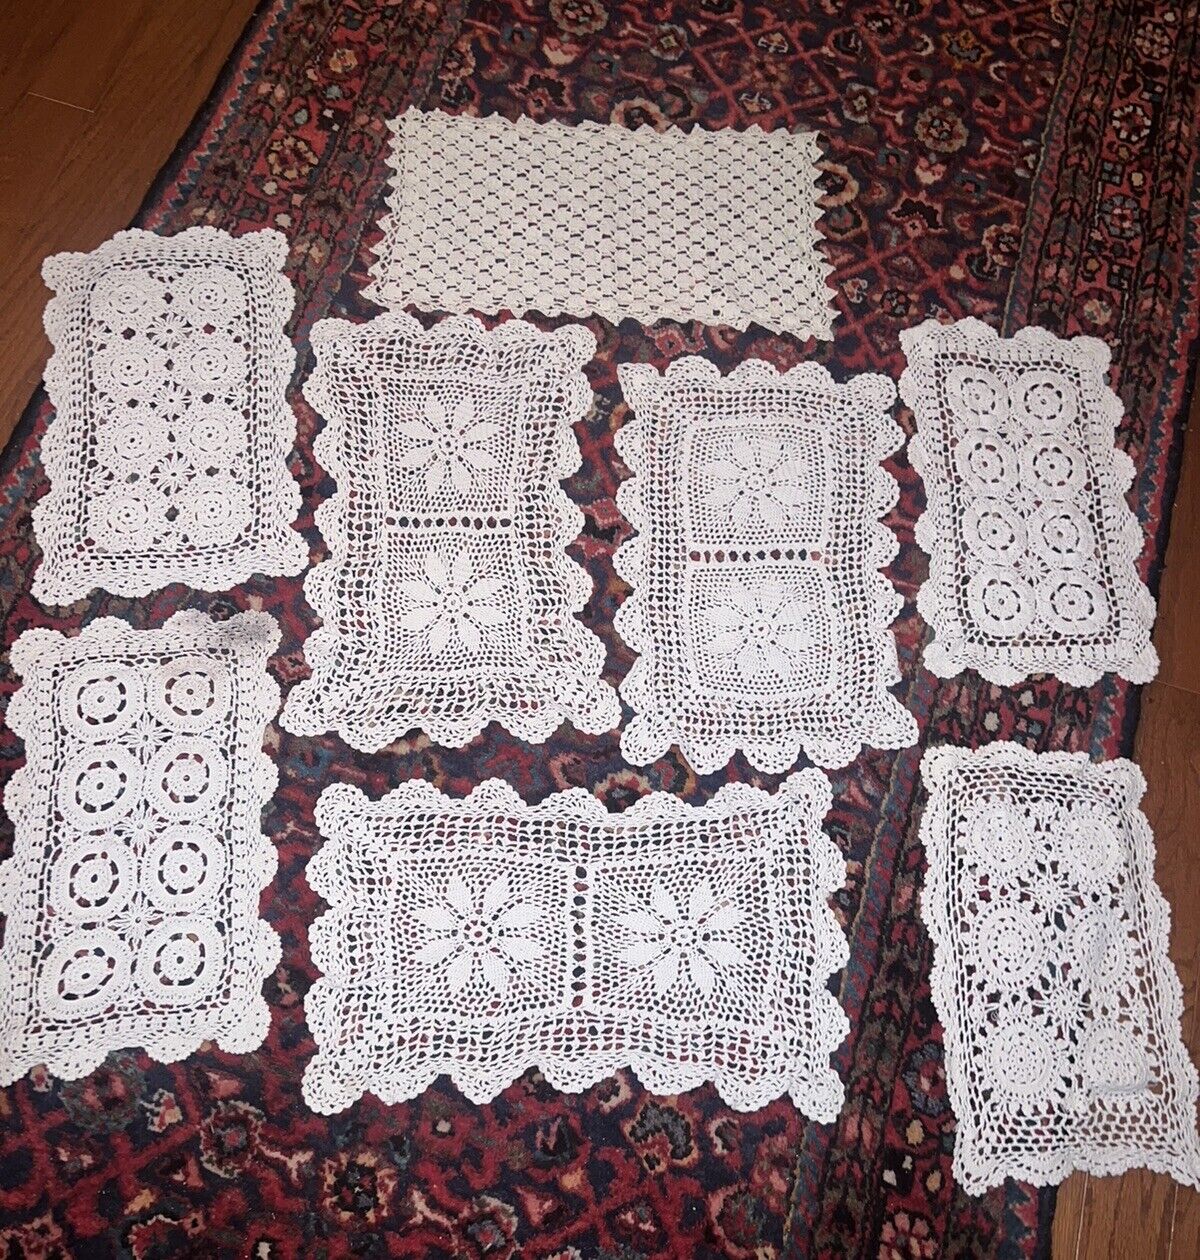 Vintage Crochet Ivory Placemats Doilies Set Of 8 Mixed Beautiful Christmas